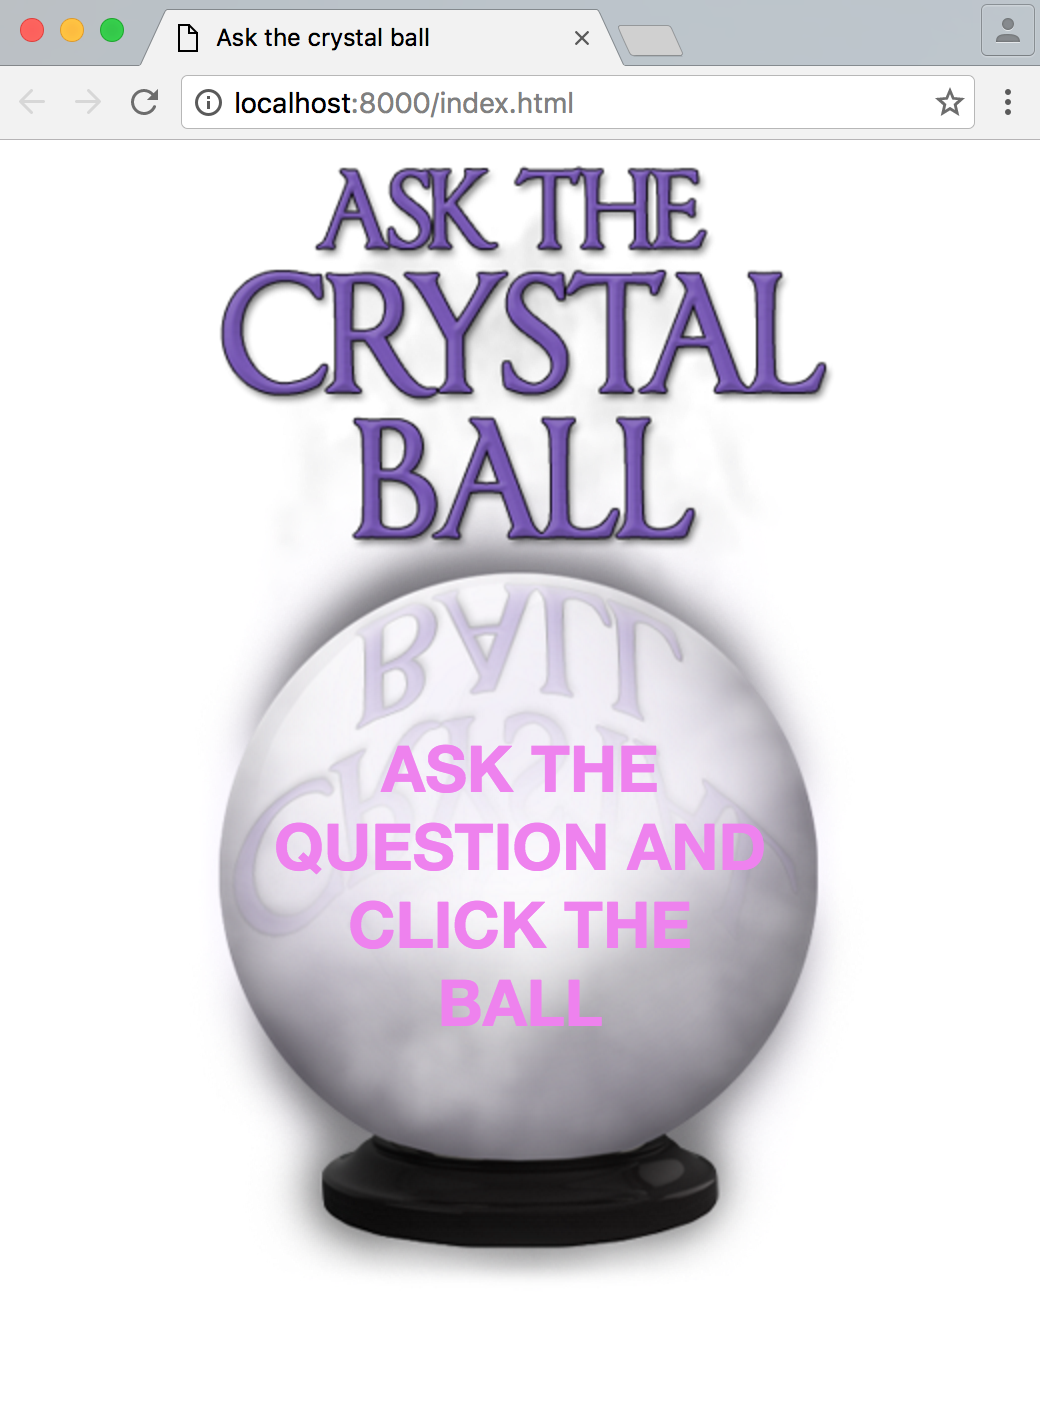 Crystal ball app in browser